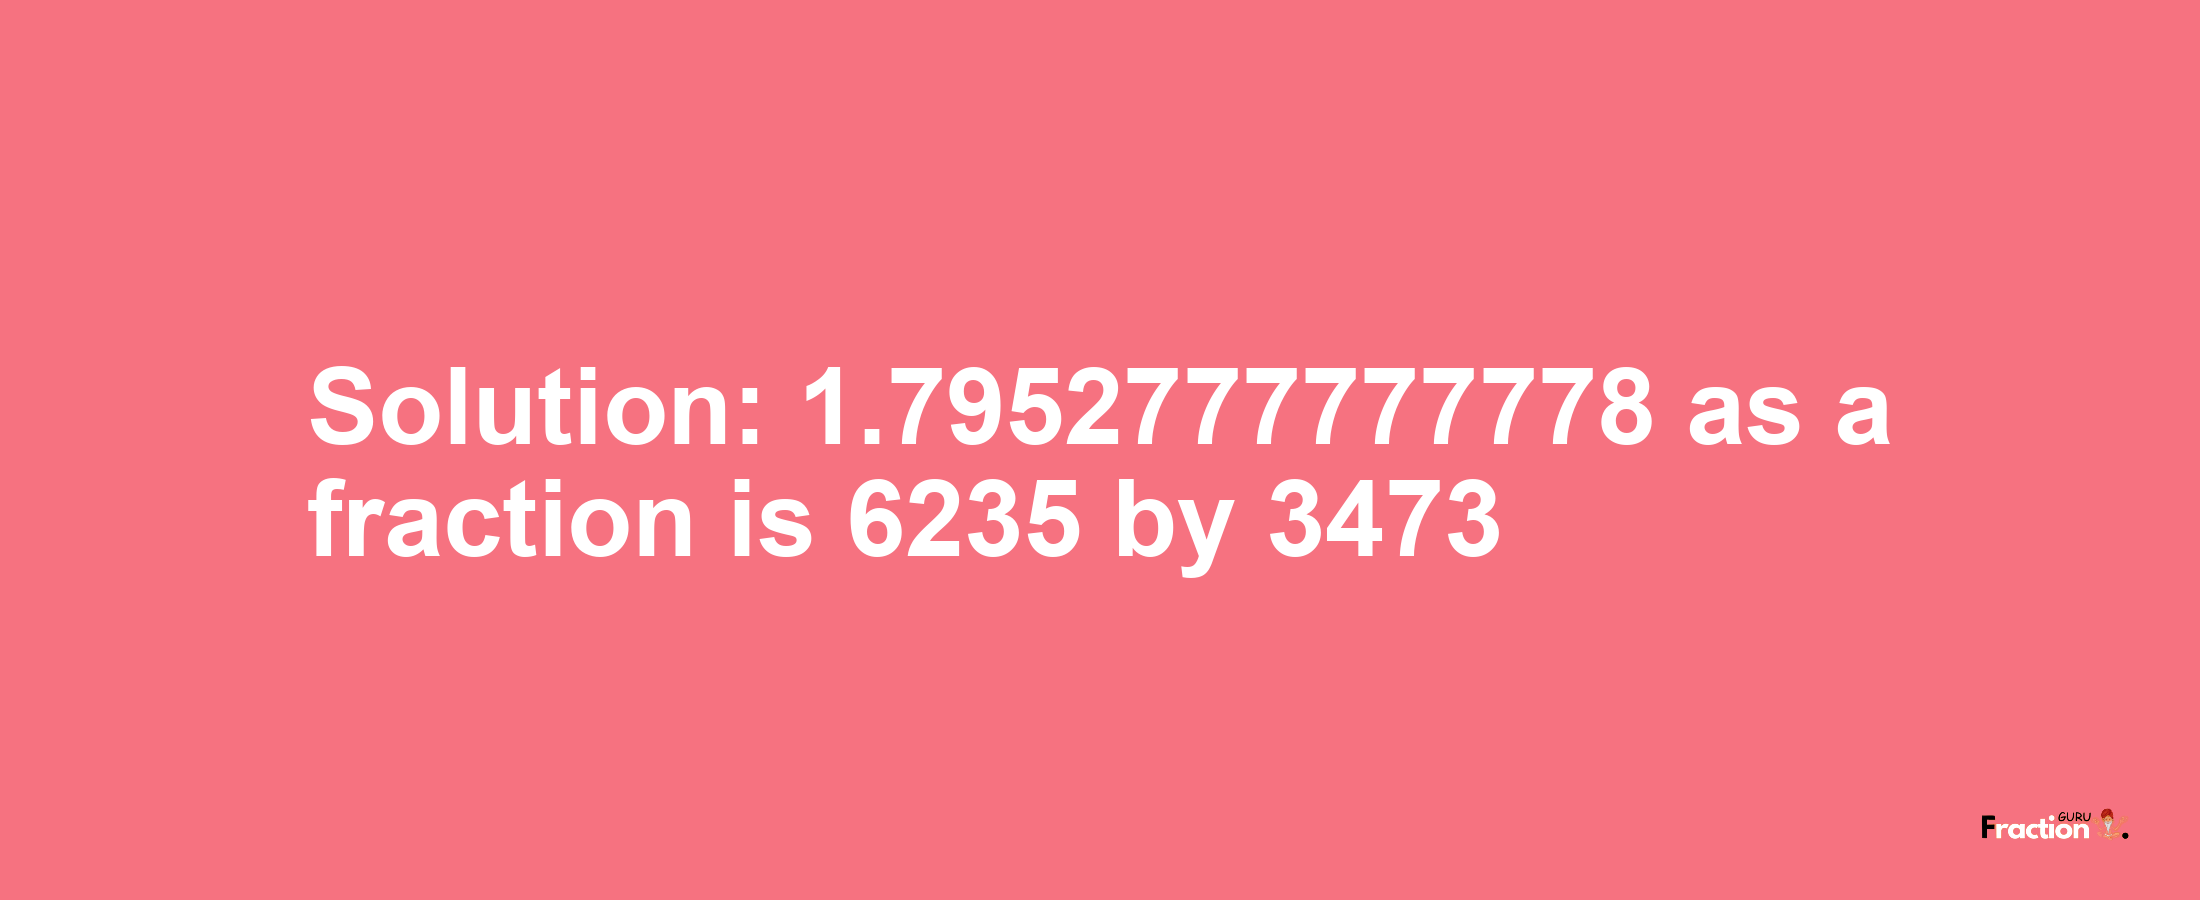 Solution:1.7952777777778 as a fraction is 6235/3473